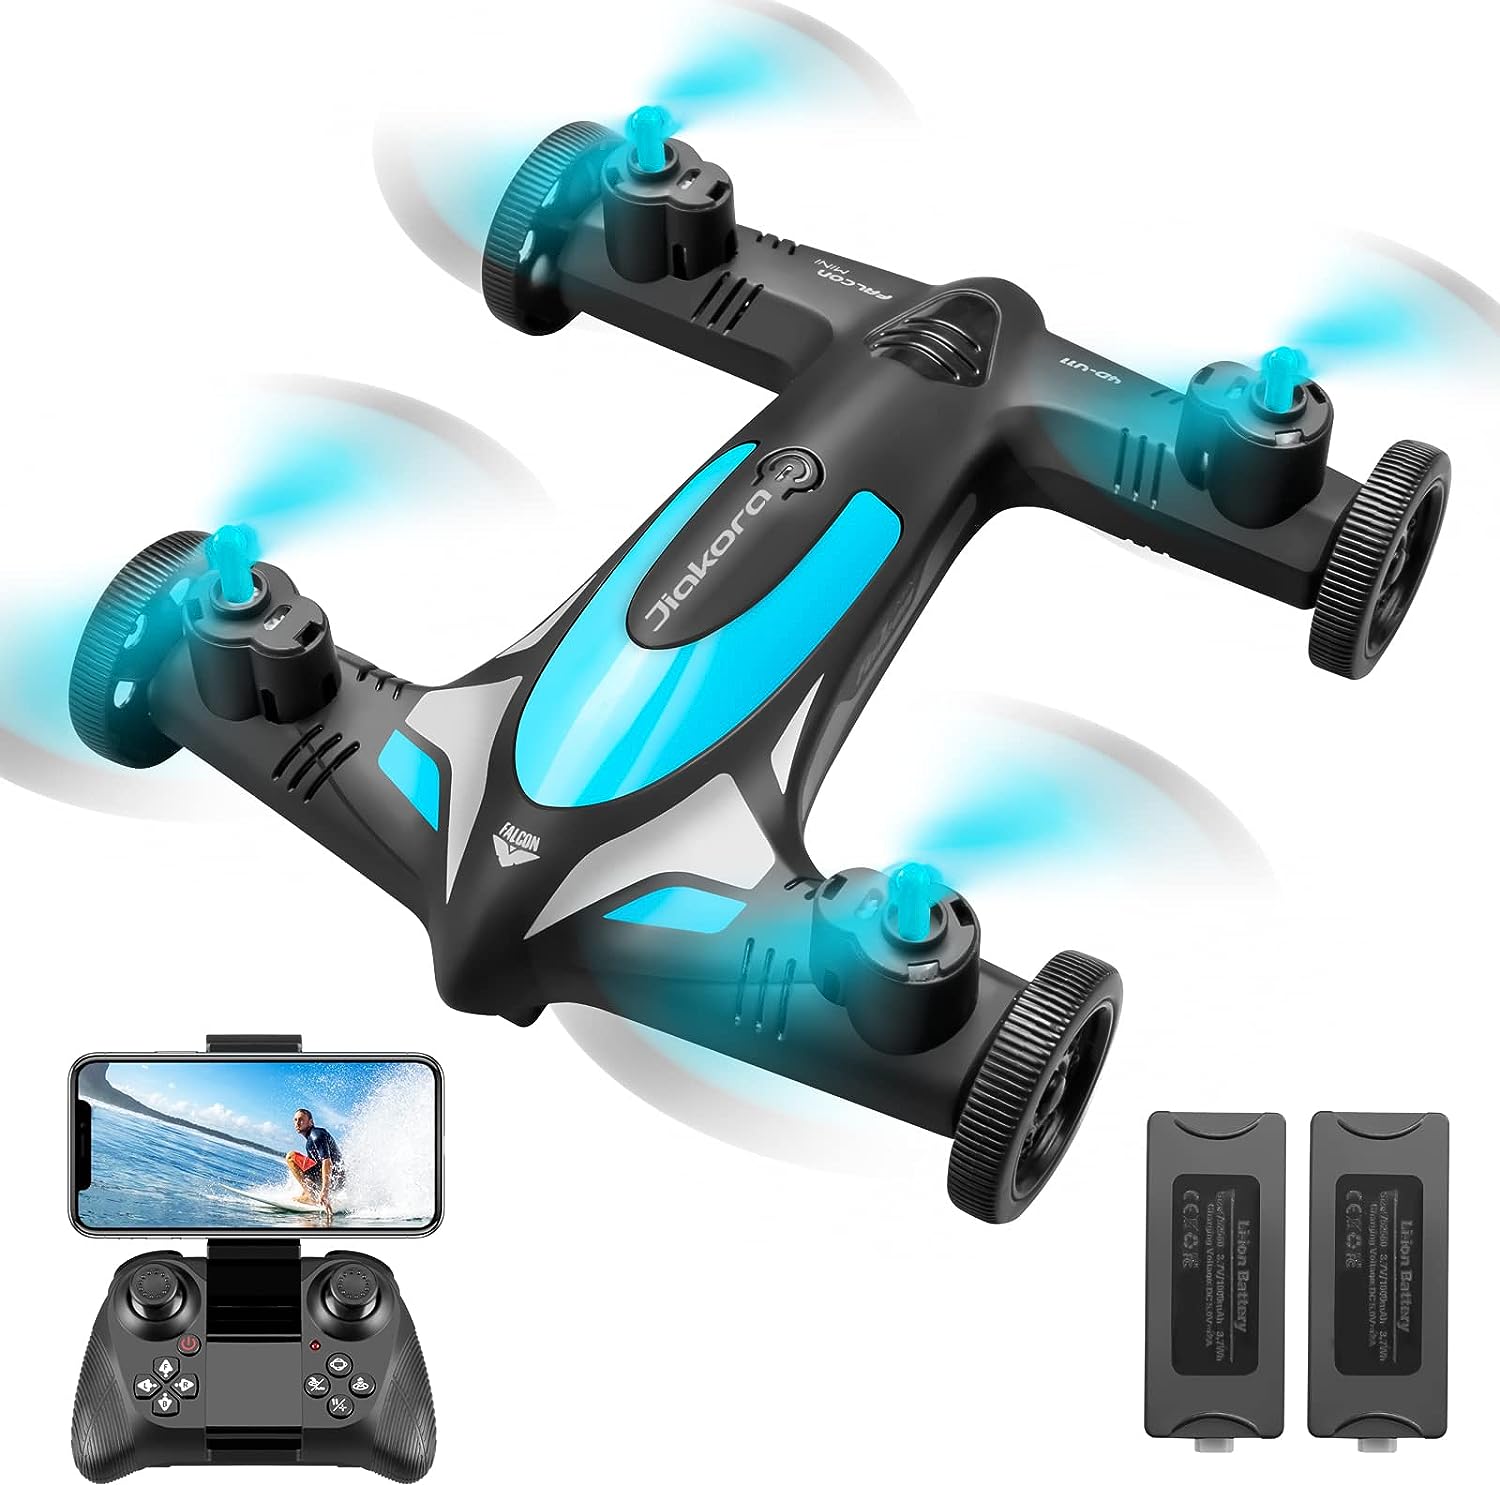 Jiakora V11 Mini Drone with Camera for Kids: A Fun and Versatile Quadcopter for Young Pilots